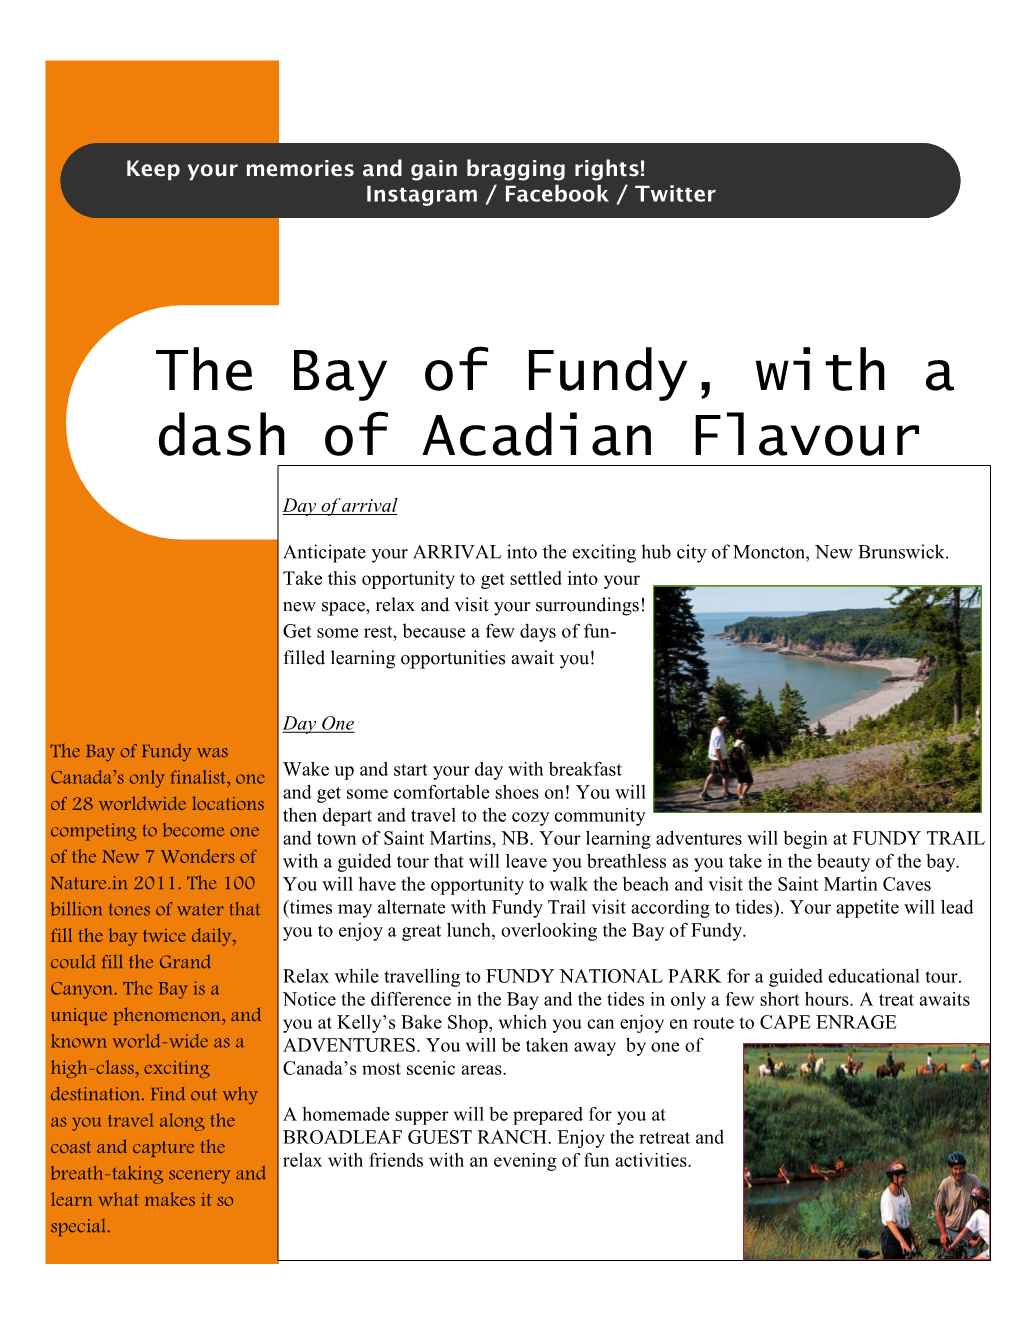 The Bay of Fundy, with a Dash of Acadian Flavour